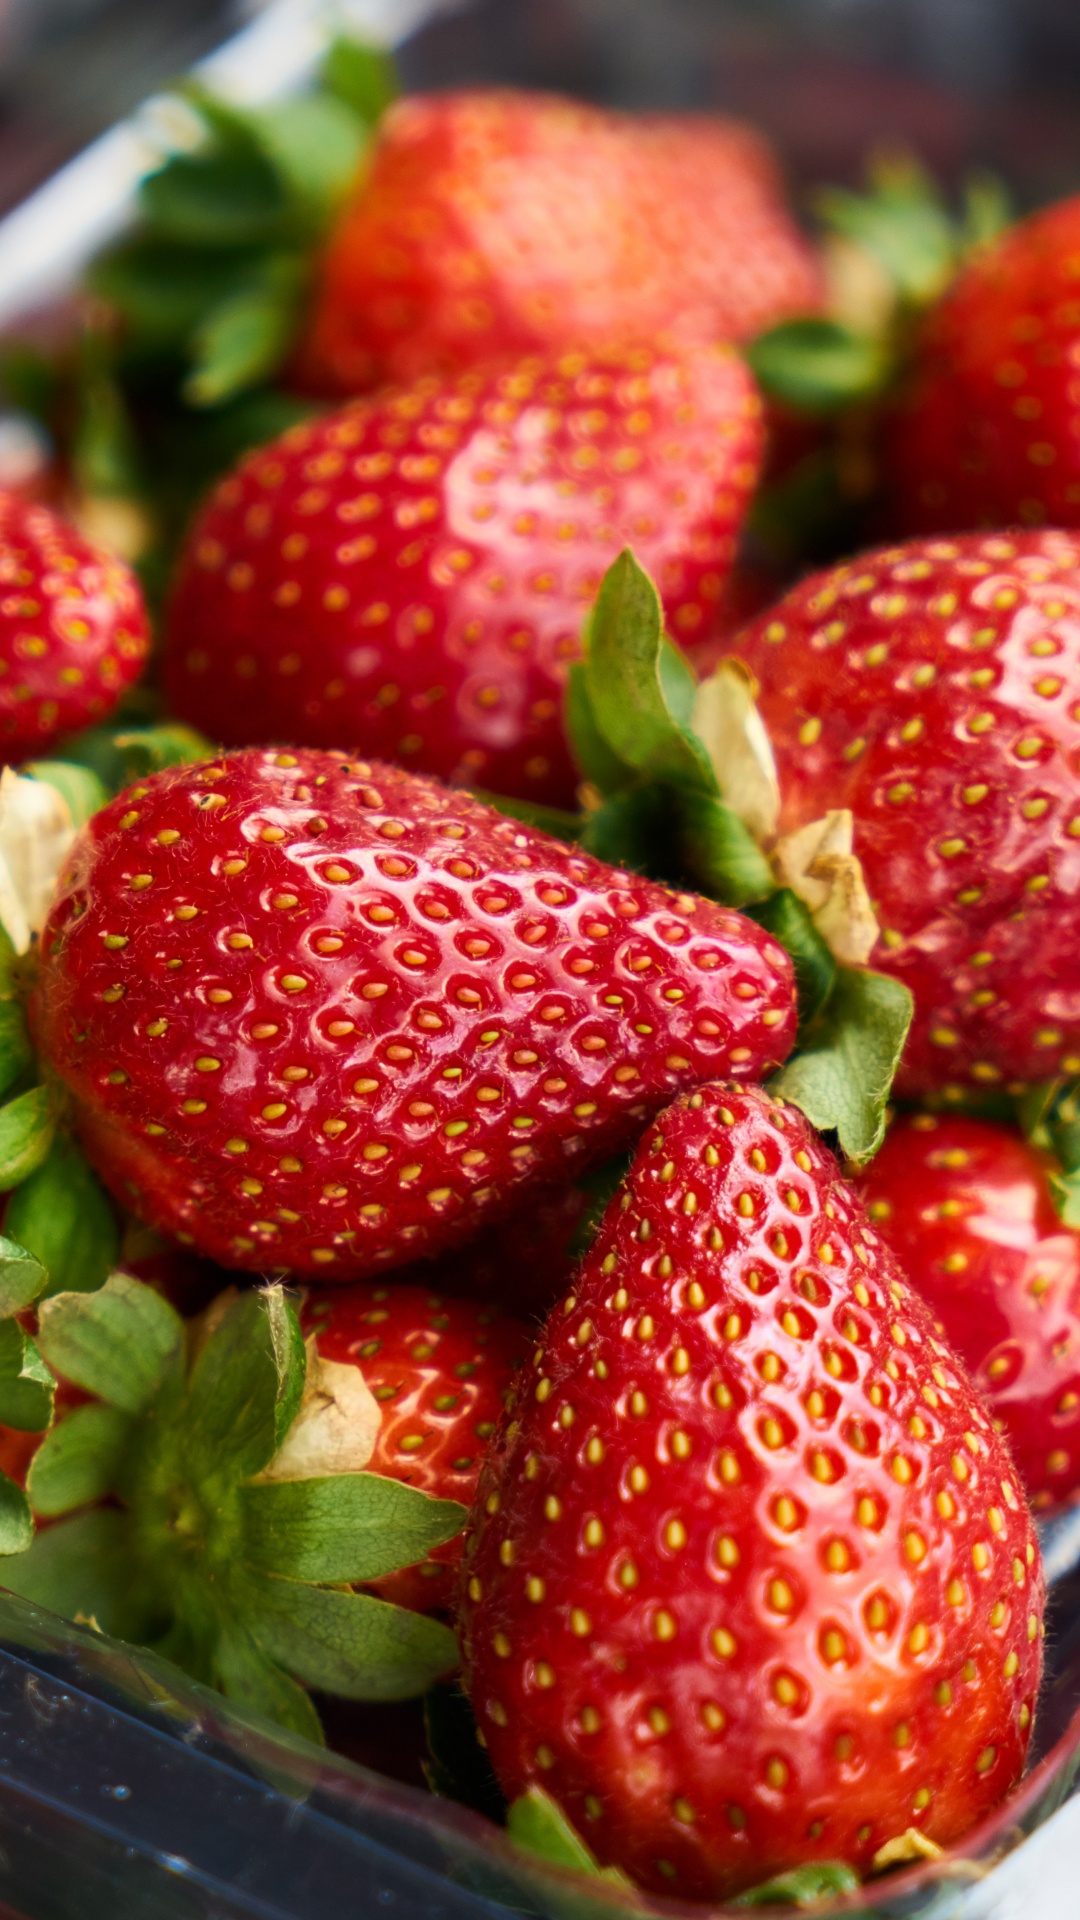 Strawberries on Stainless Steel Tray. Wallpaper in 1080x1920 Resolution